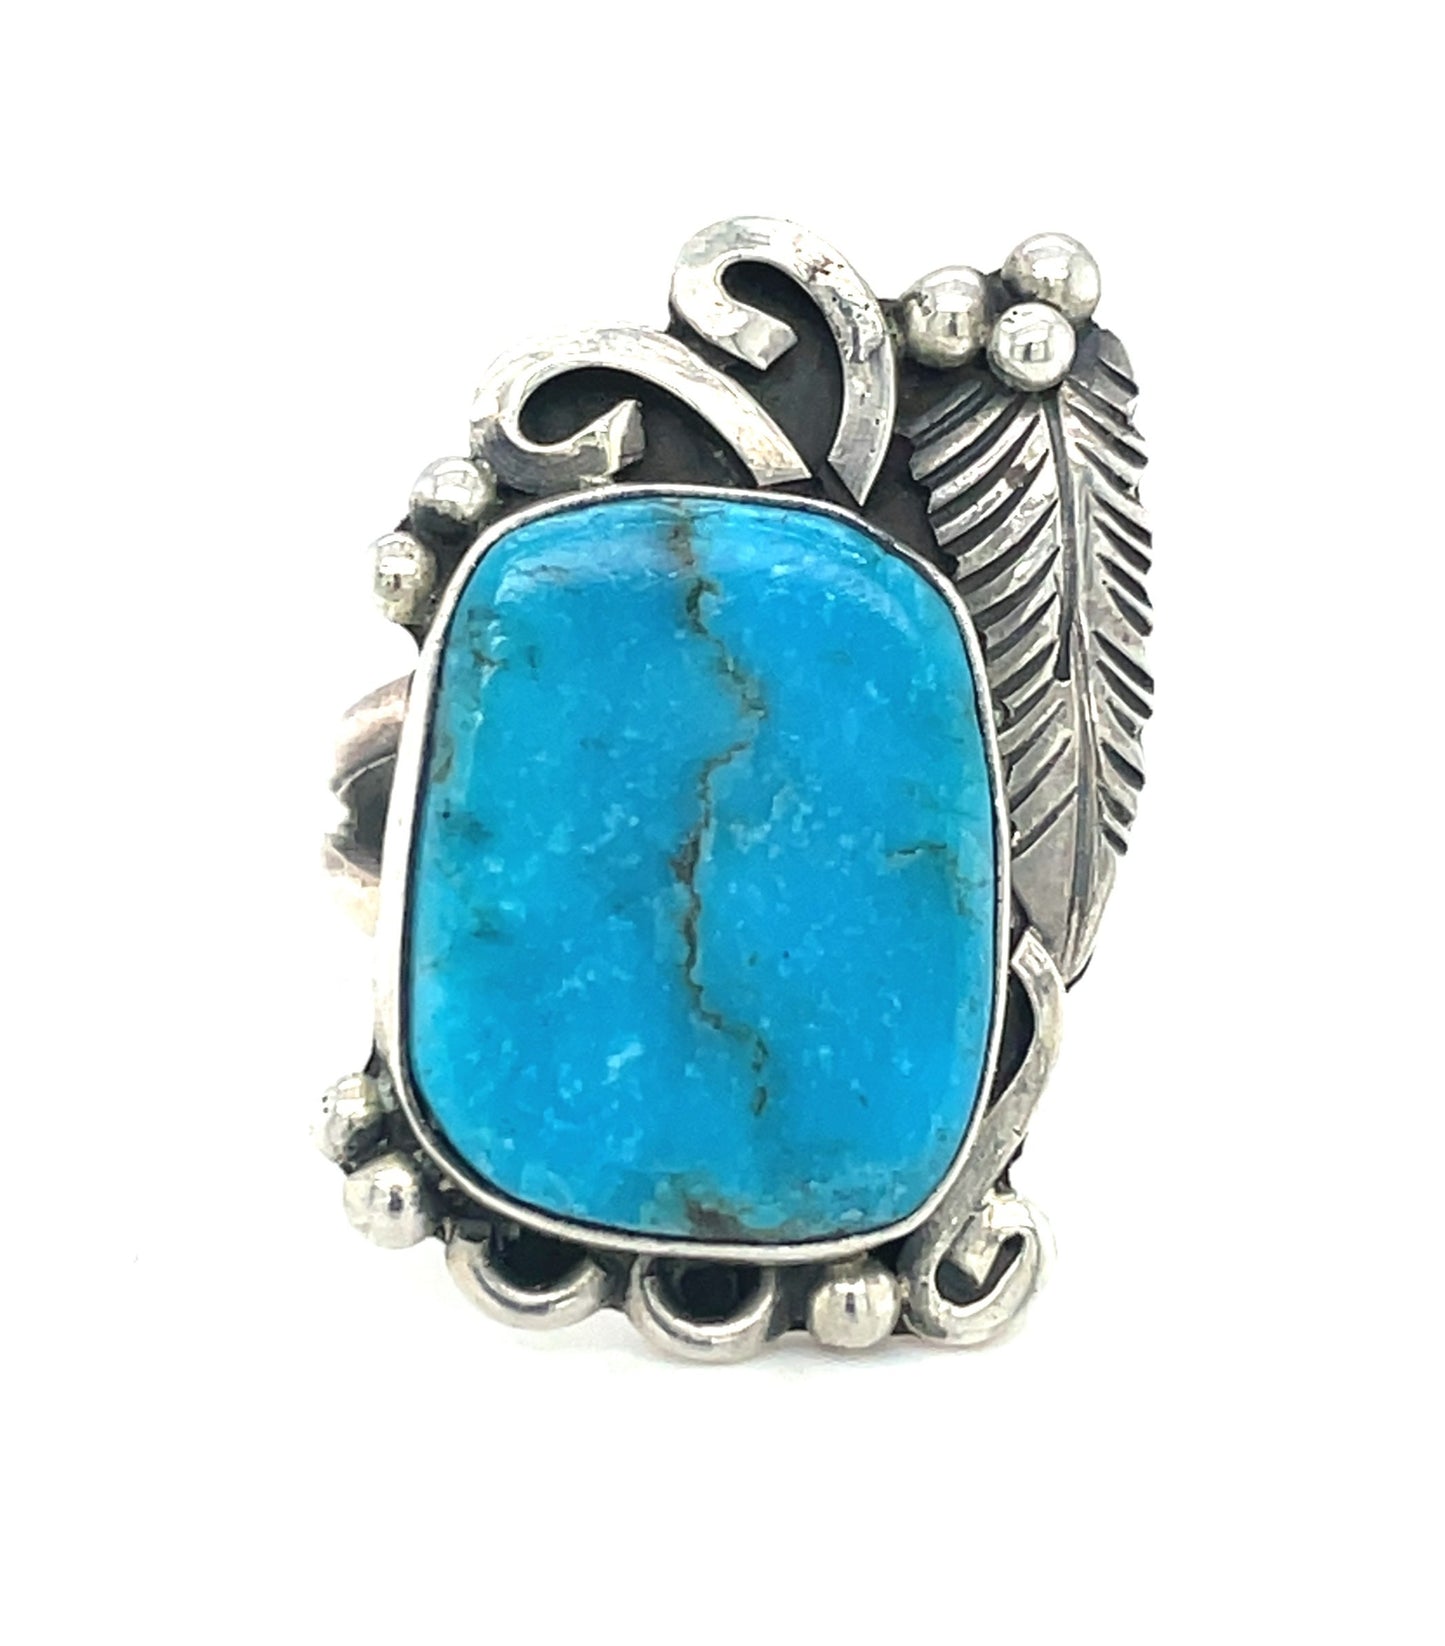 Vintage Southwestern Sterling Silver and Turquoise Ring Size 7 1/4